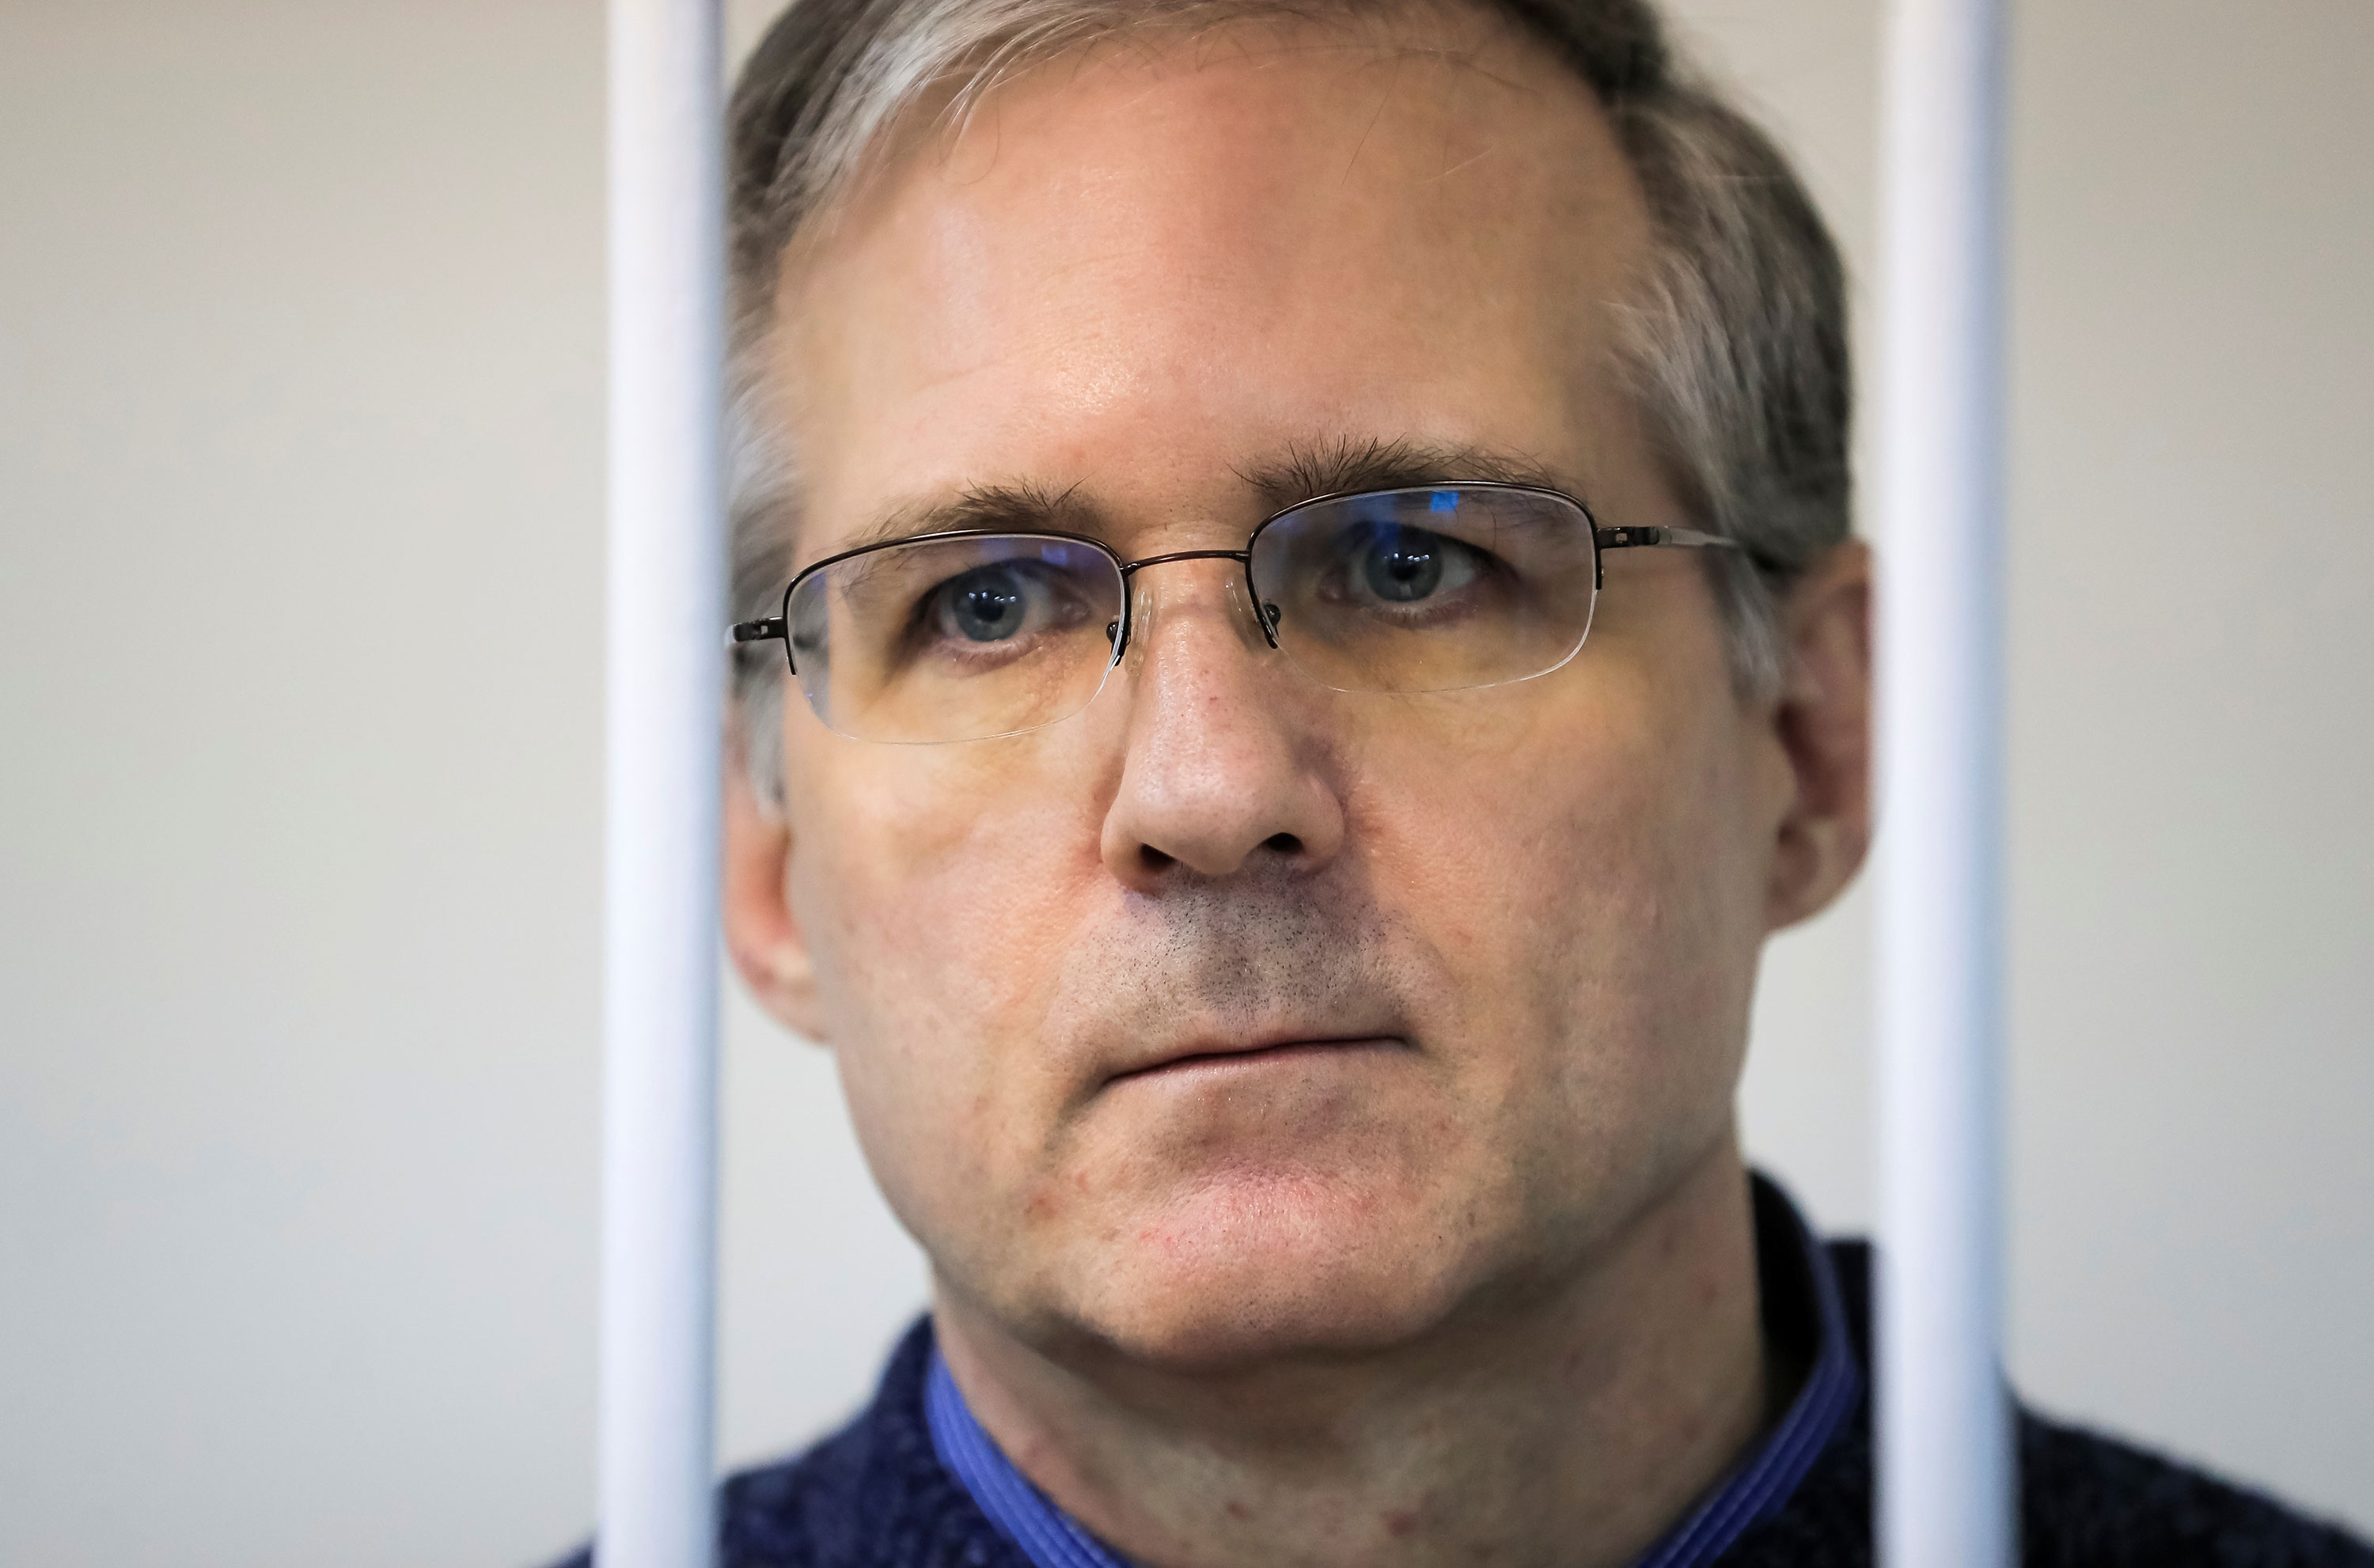 Paul Whelan stands inside a defendants' cage during a court hearing in Moscow on October 24, 2019. 